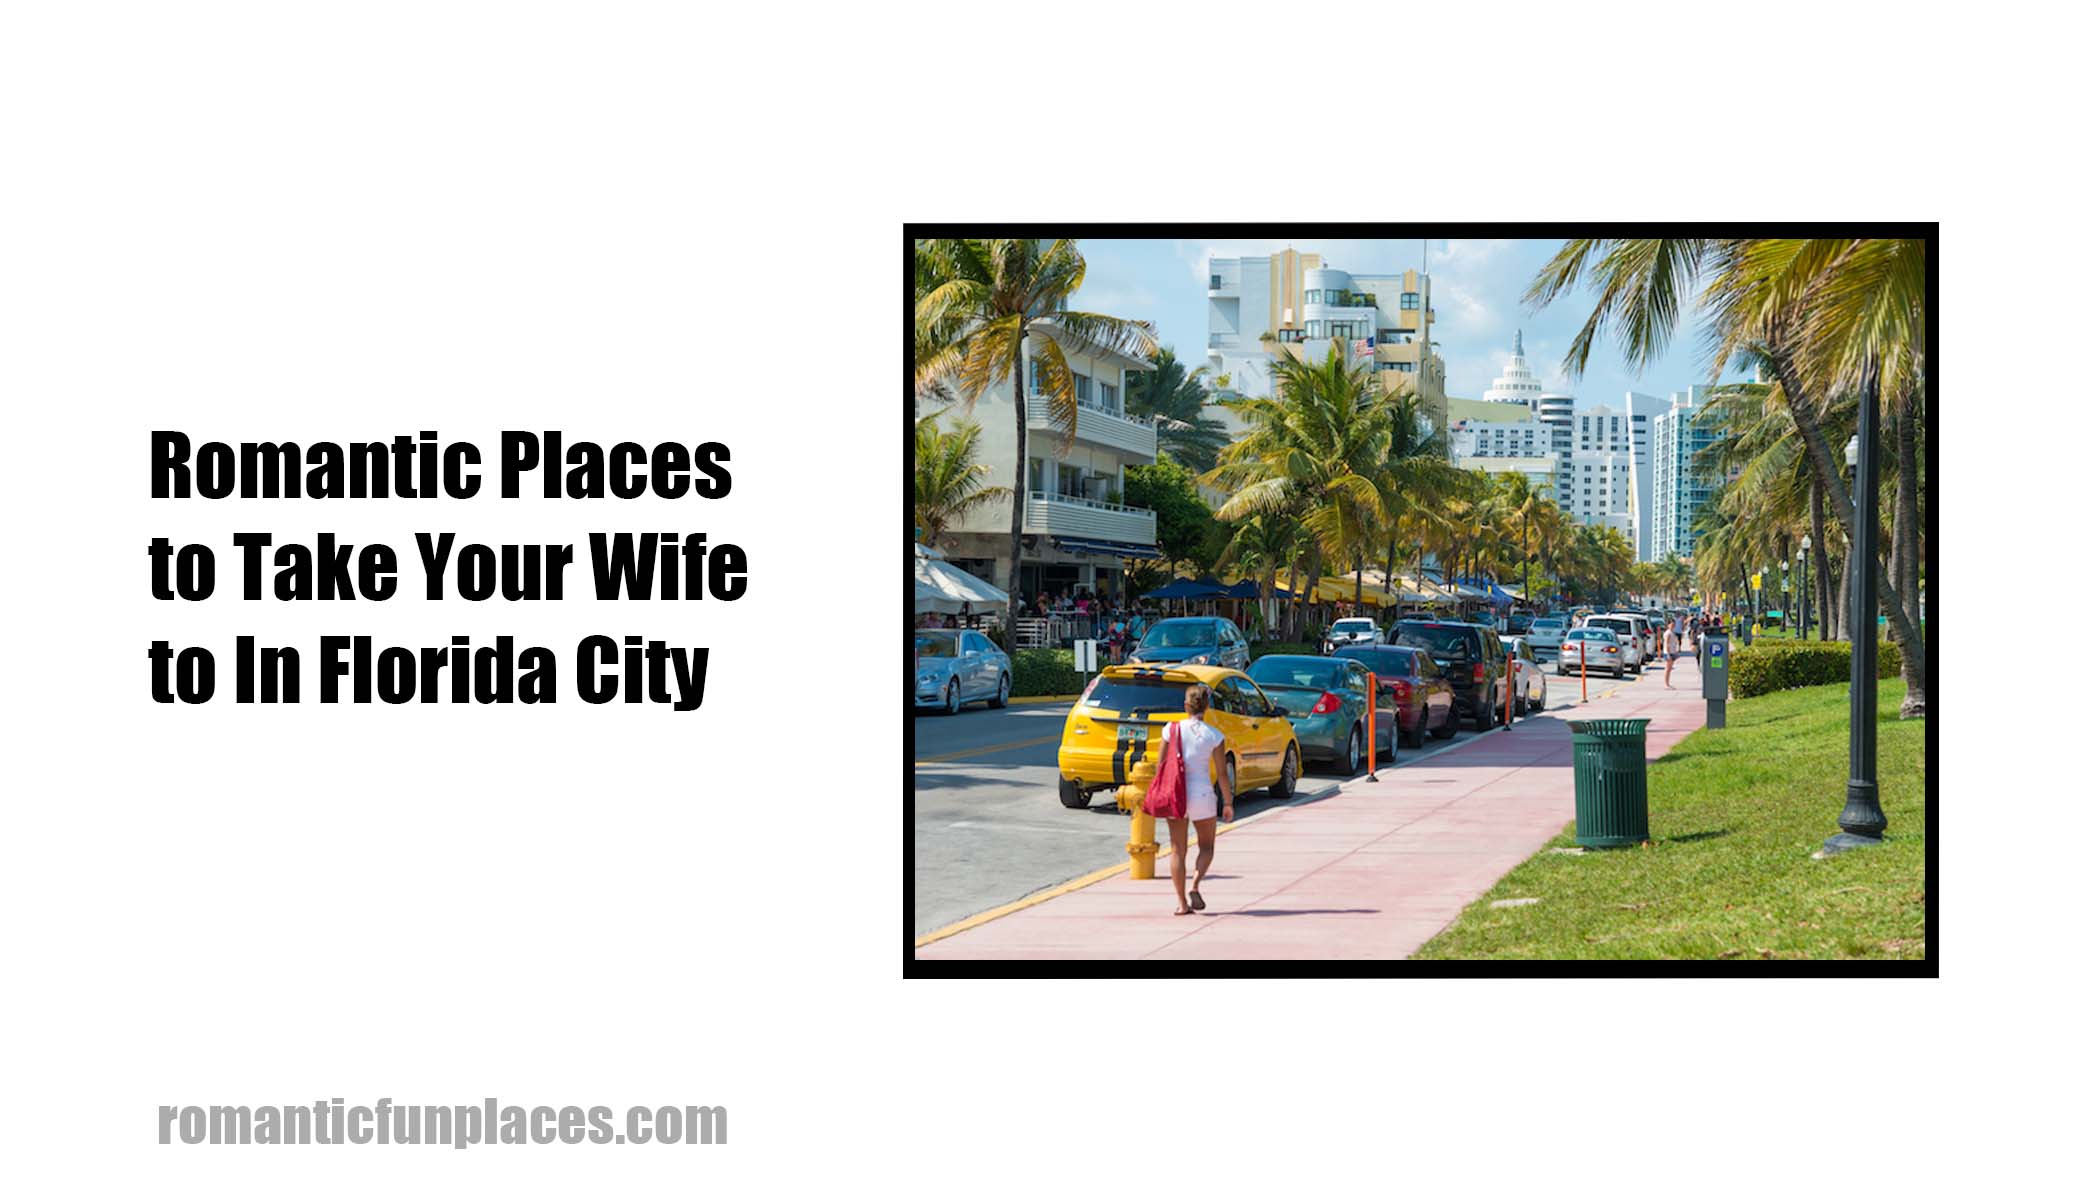 Romantic Places to Take Your Wife to In Florida City